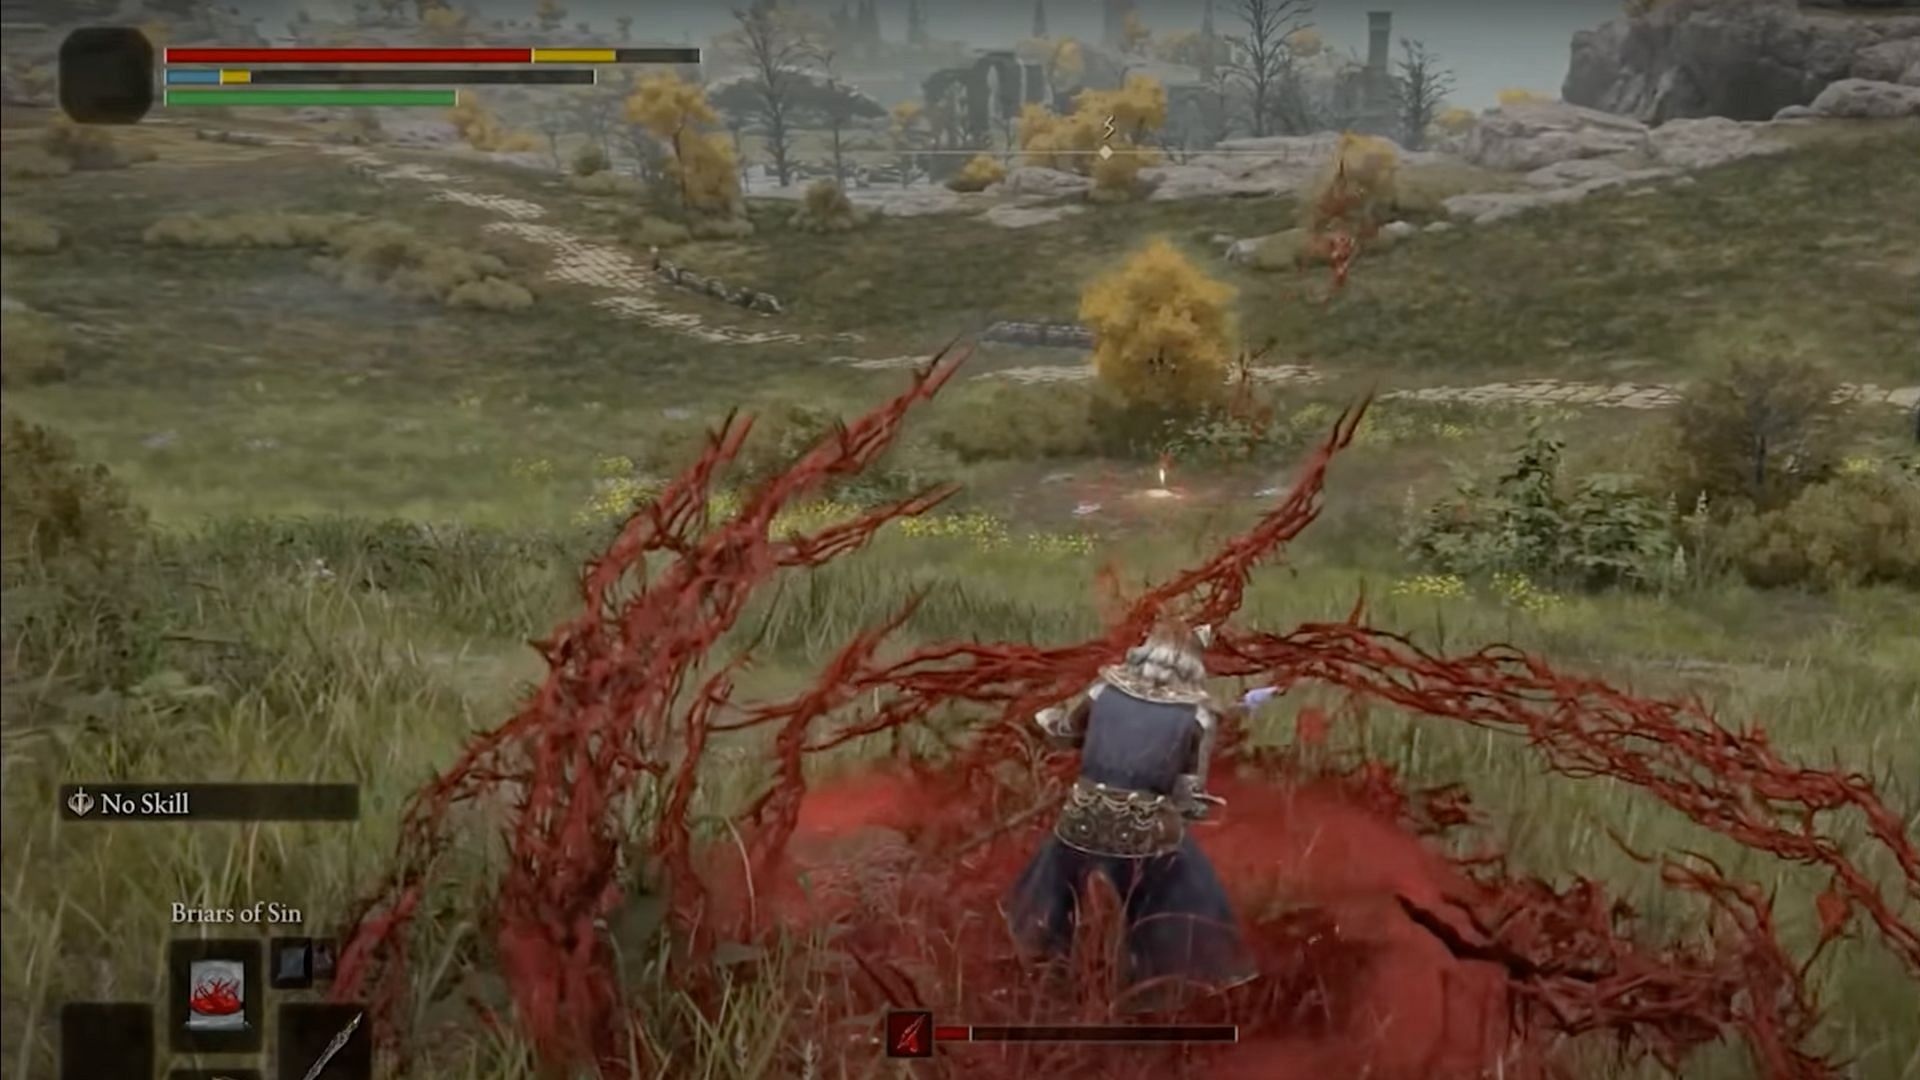 Players are able to use Aberrant sorcery spells to cast thorn-inspired magic that can decimate their enemies (Image via Sipder/YouTube)